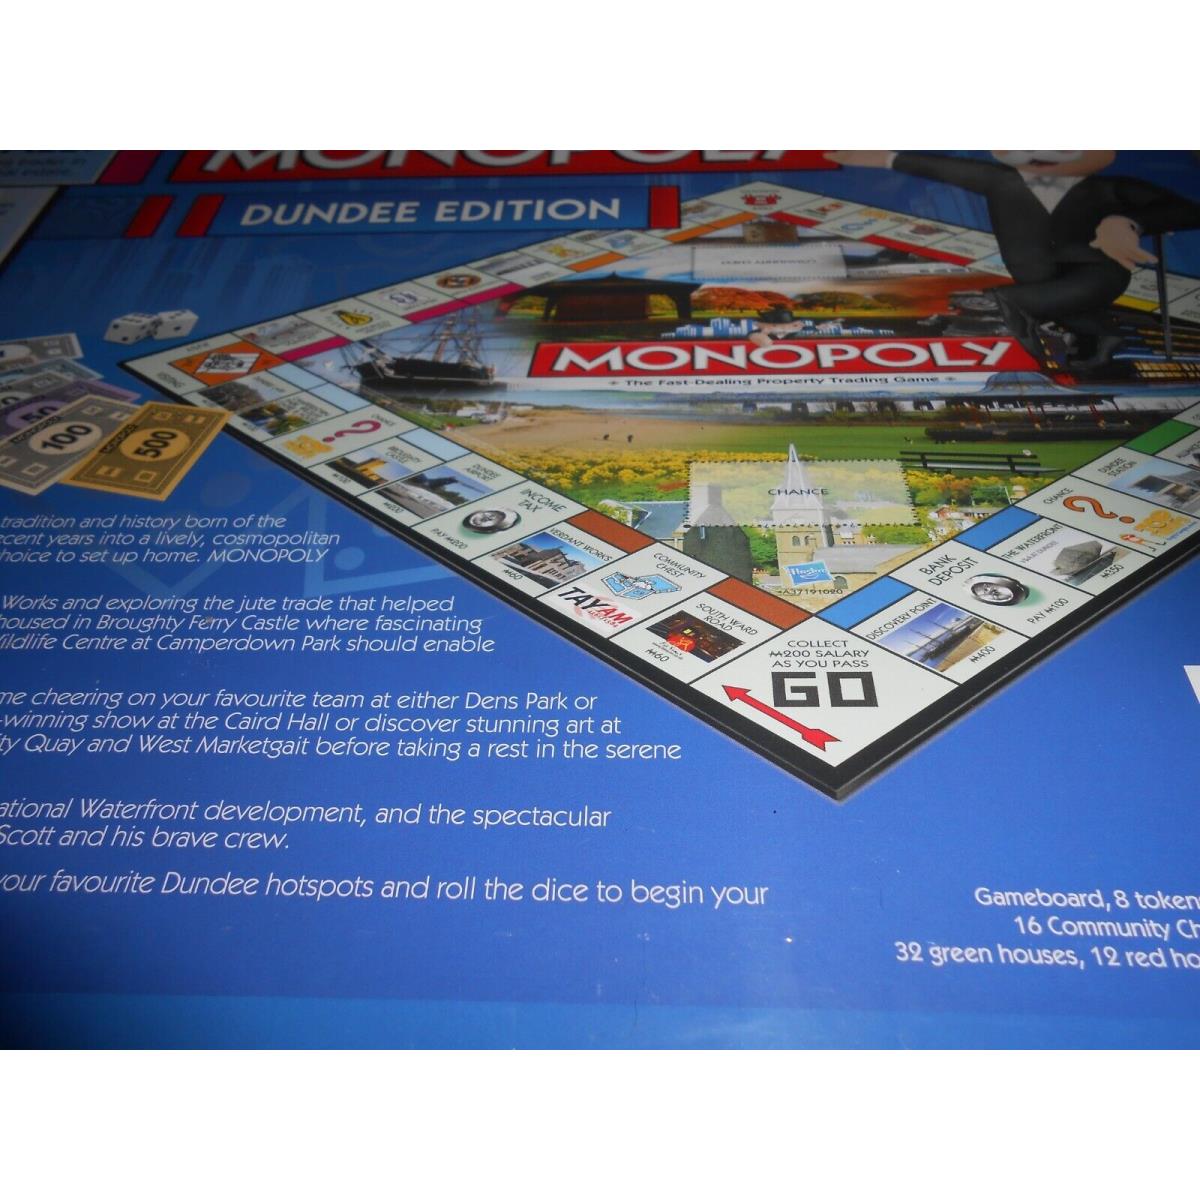 Monopoly Dundee Edition..new